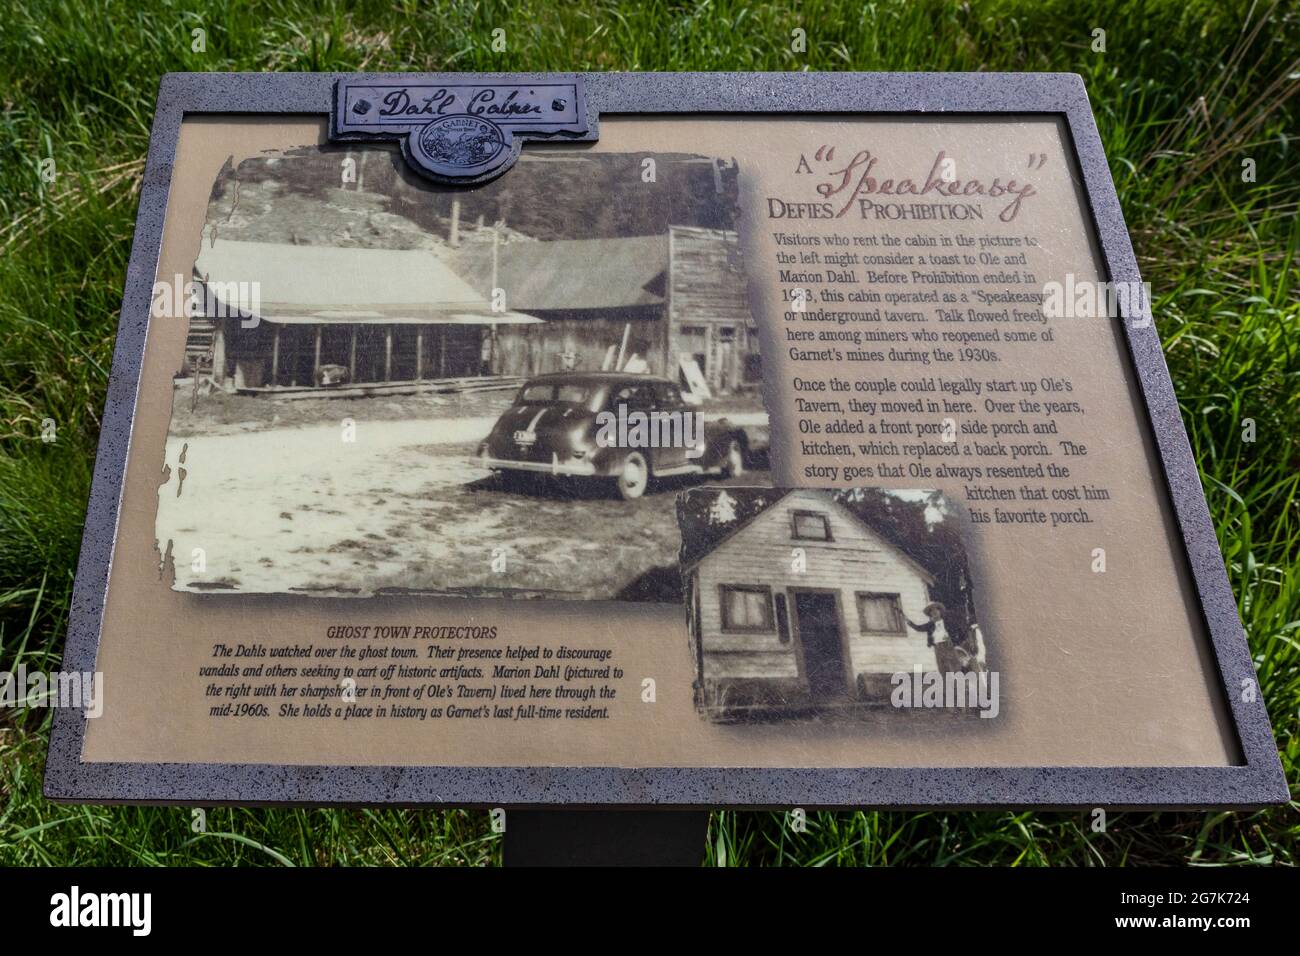 Interpretive sign telling story of a speakeasy in Garnet ghost town,Montana, USA Stock Photo